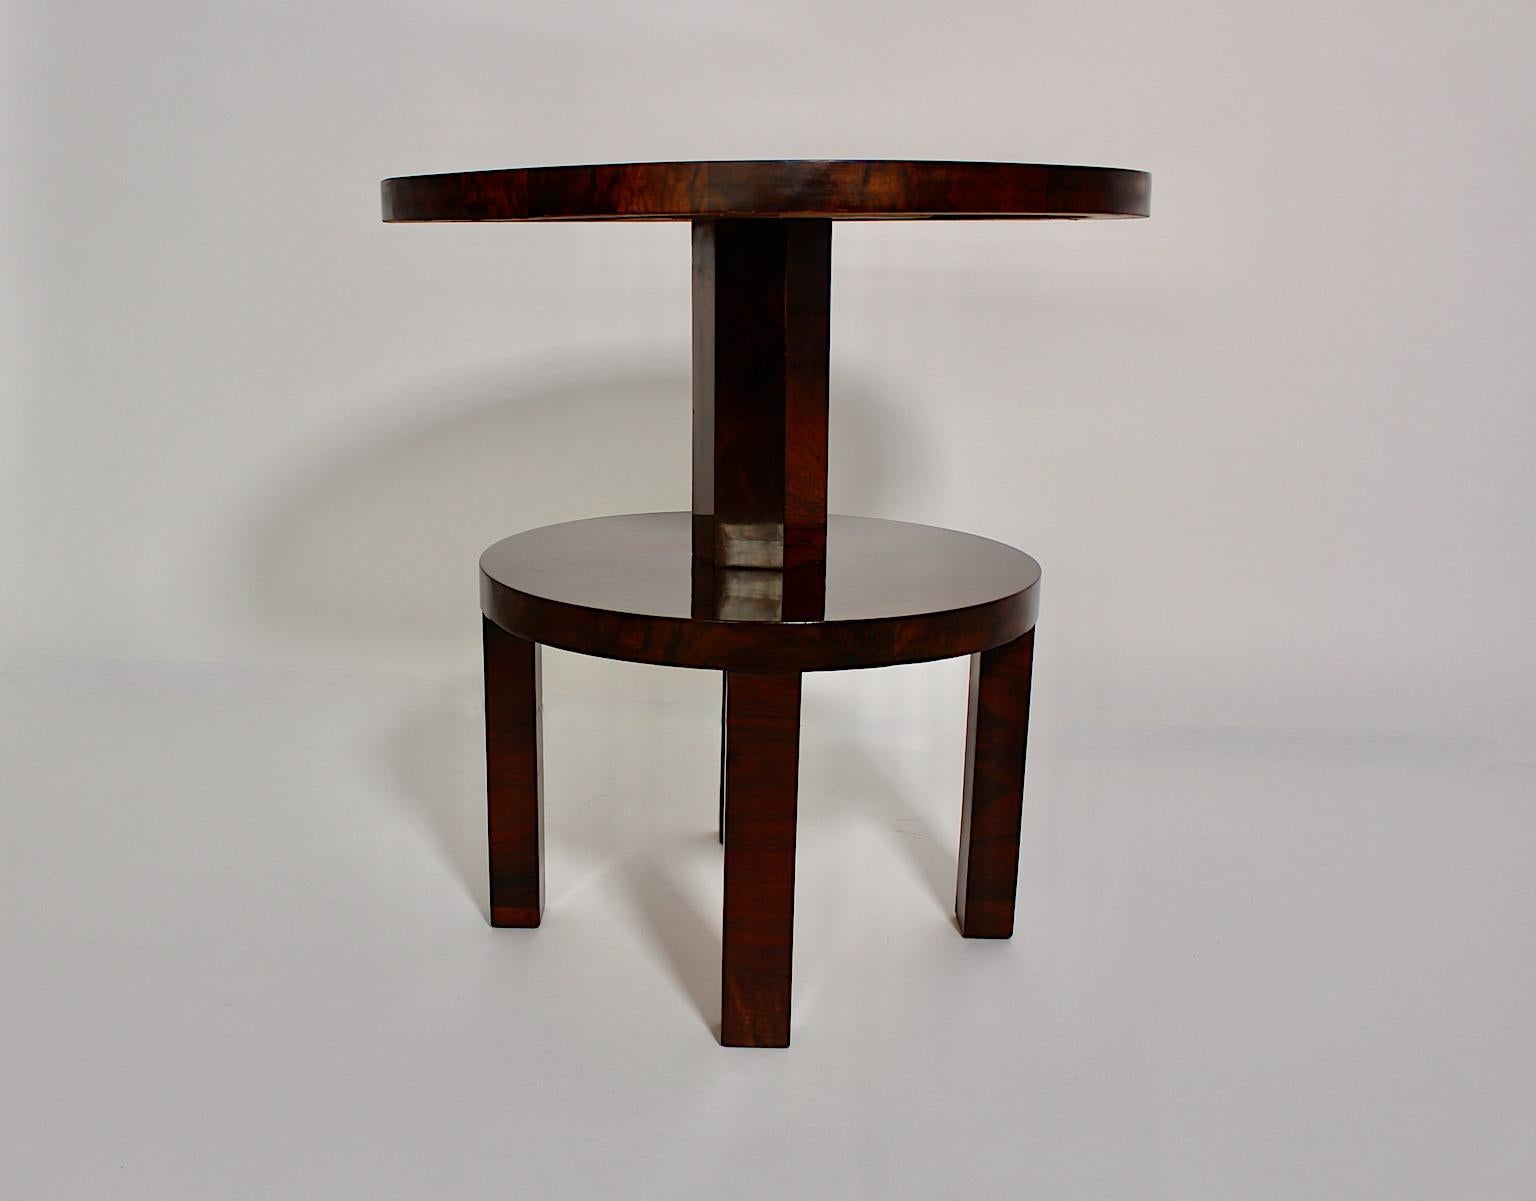 Art Deco vintage two tier circular coffee table or sofa table from walnut attributed to Ludwig Schmitt 1930s Vienna.
Ludwig Schmitt Kunsttischlerei was a high quality cabinetmaker, also K.& K. Hoftischlerei since 1898, located in the 1st district